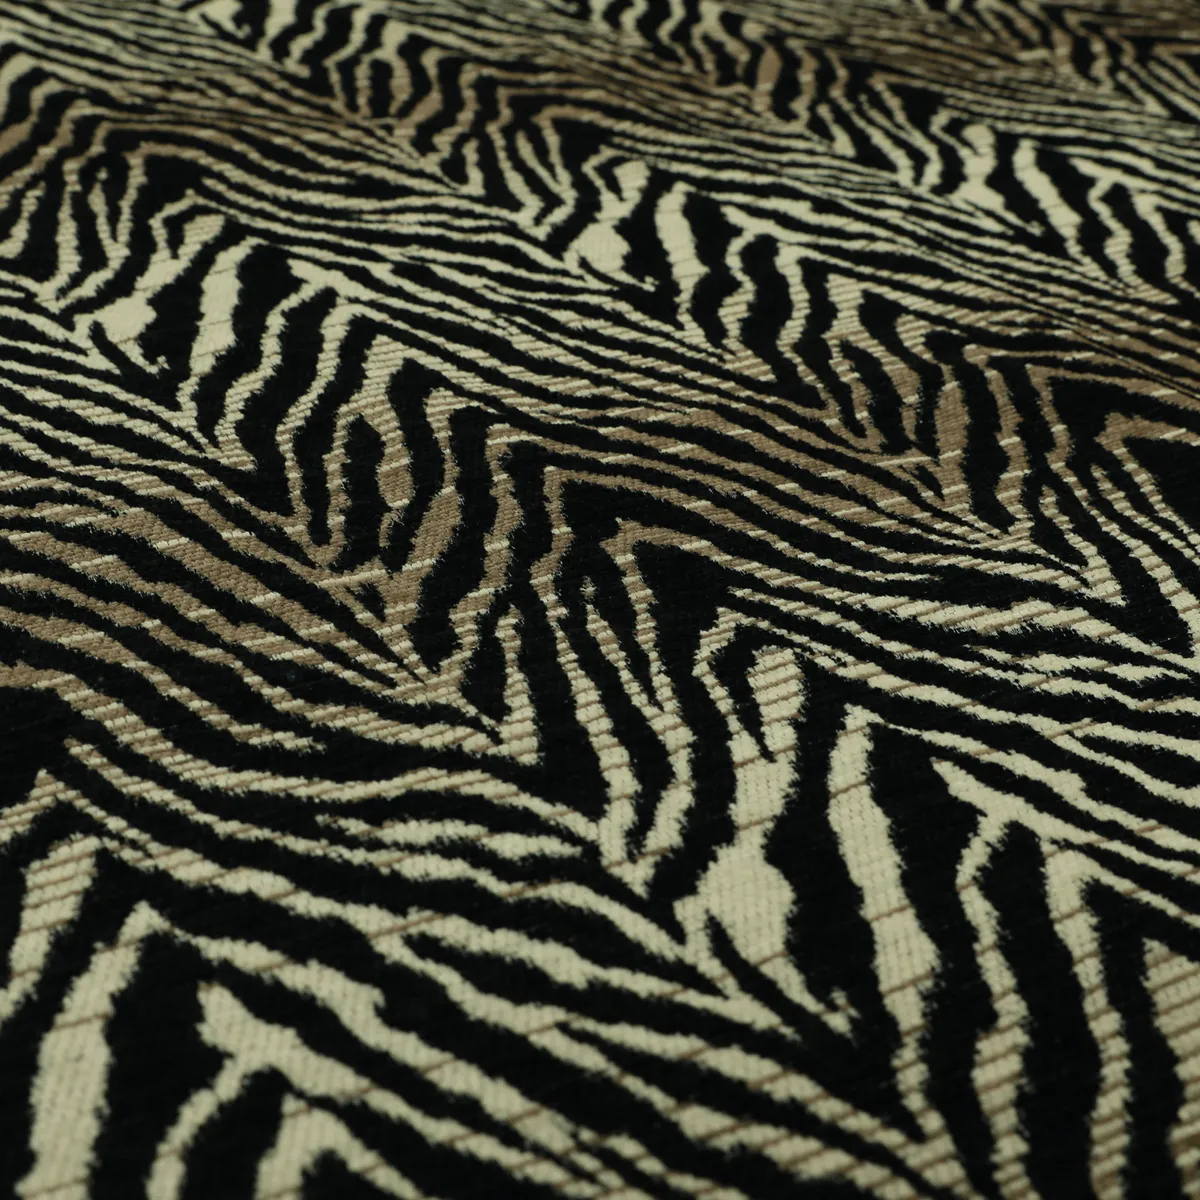 Animal-theme zebra jungle pattern black-brown-beige-coloured soft chenille-textured upholstery fabric, £41.99 per metre, Yorkshire Fabric Shop